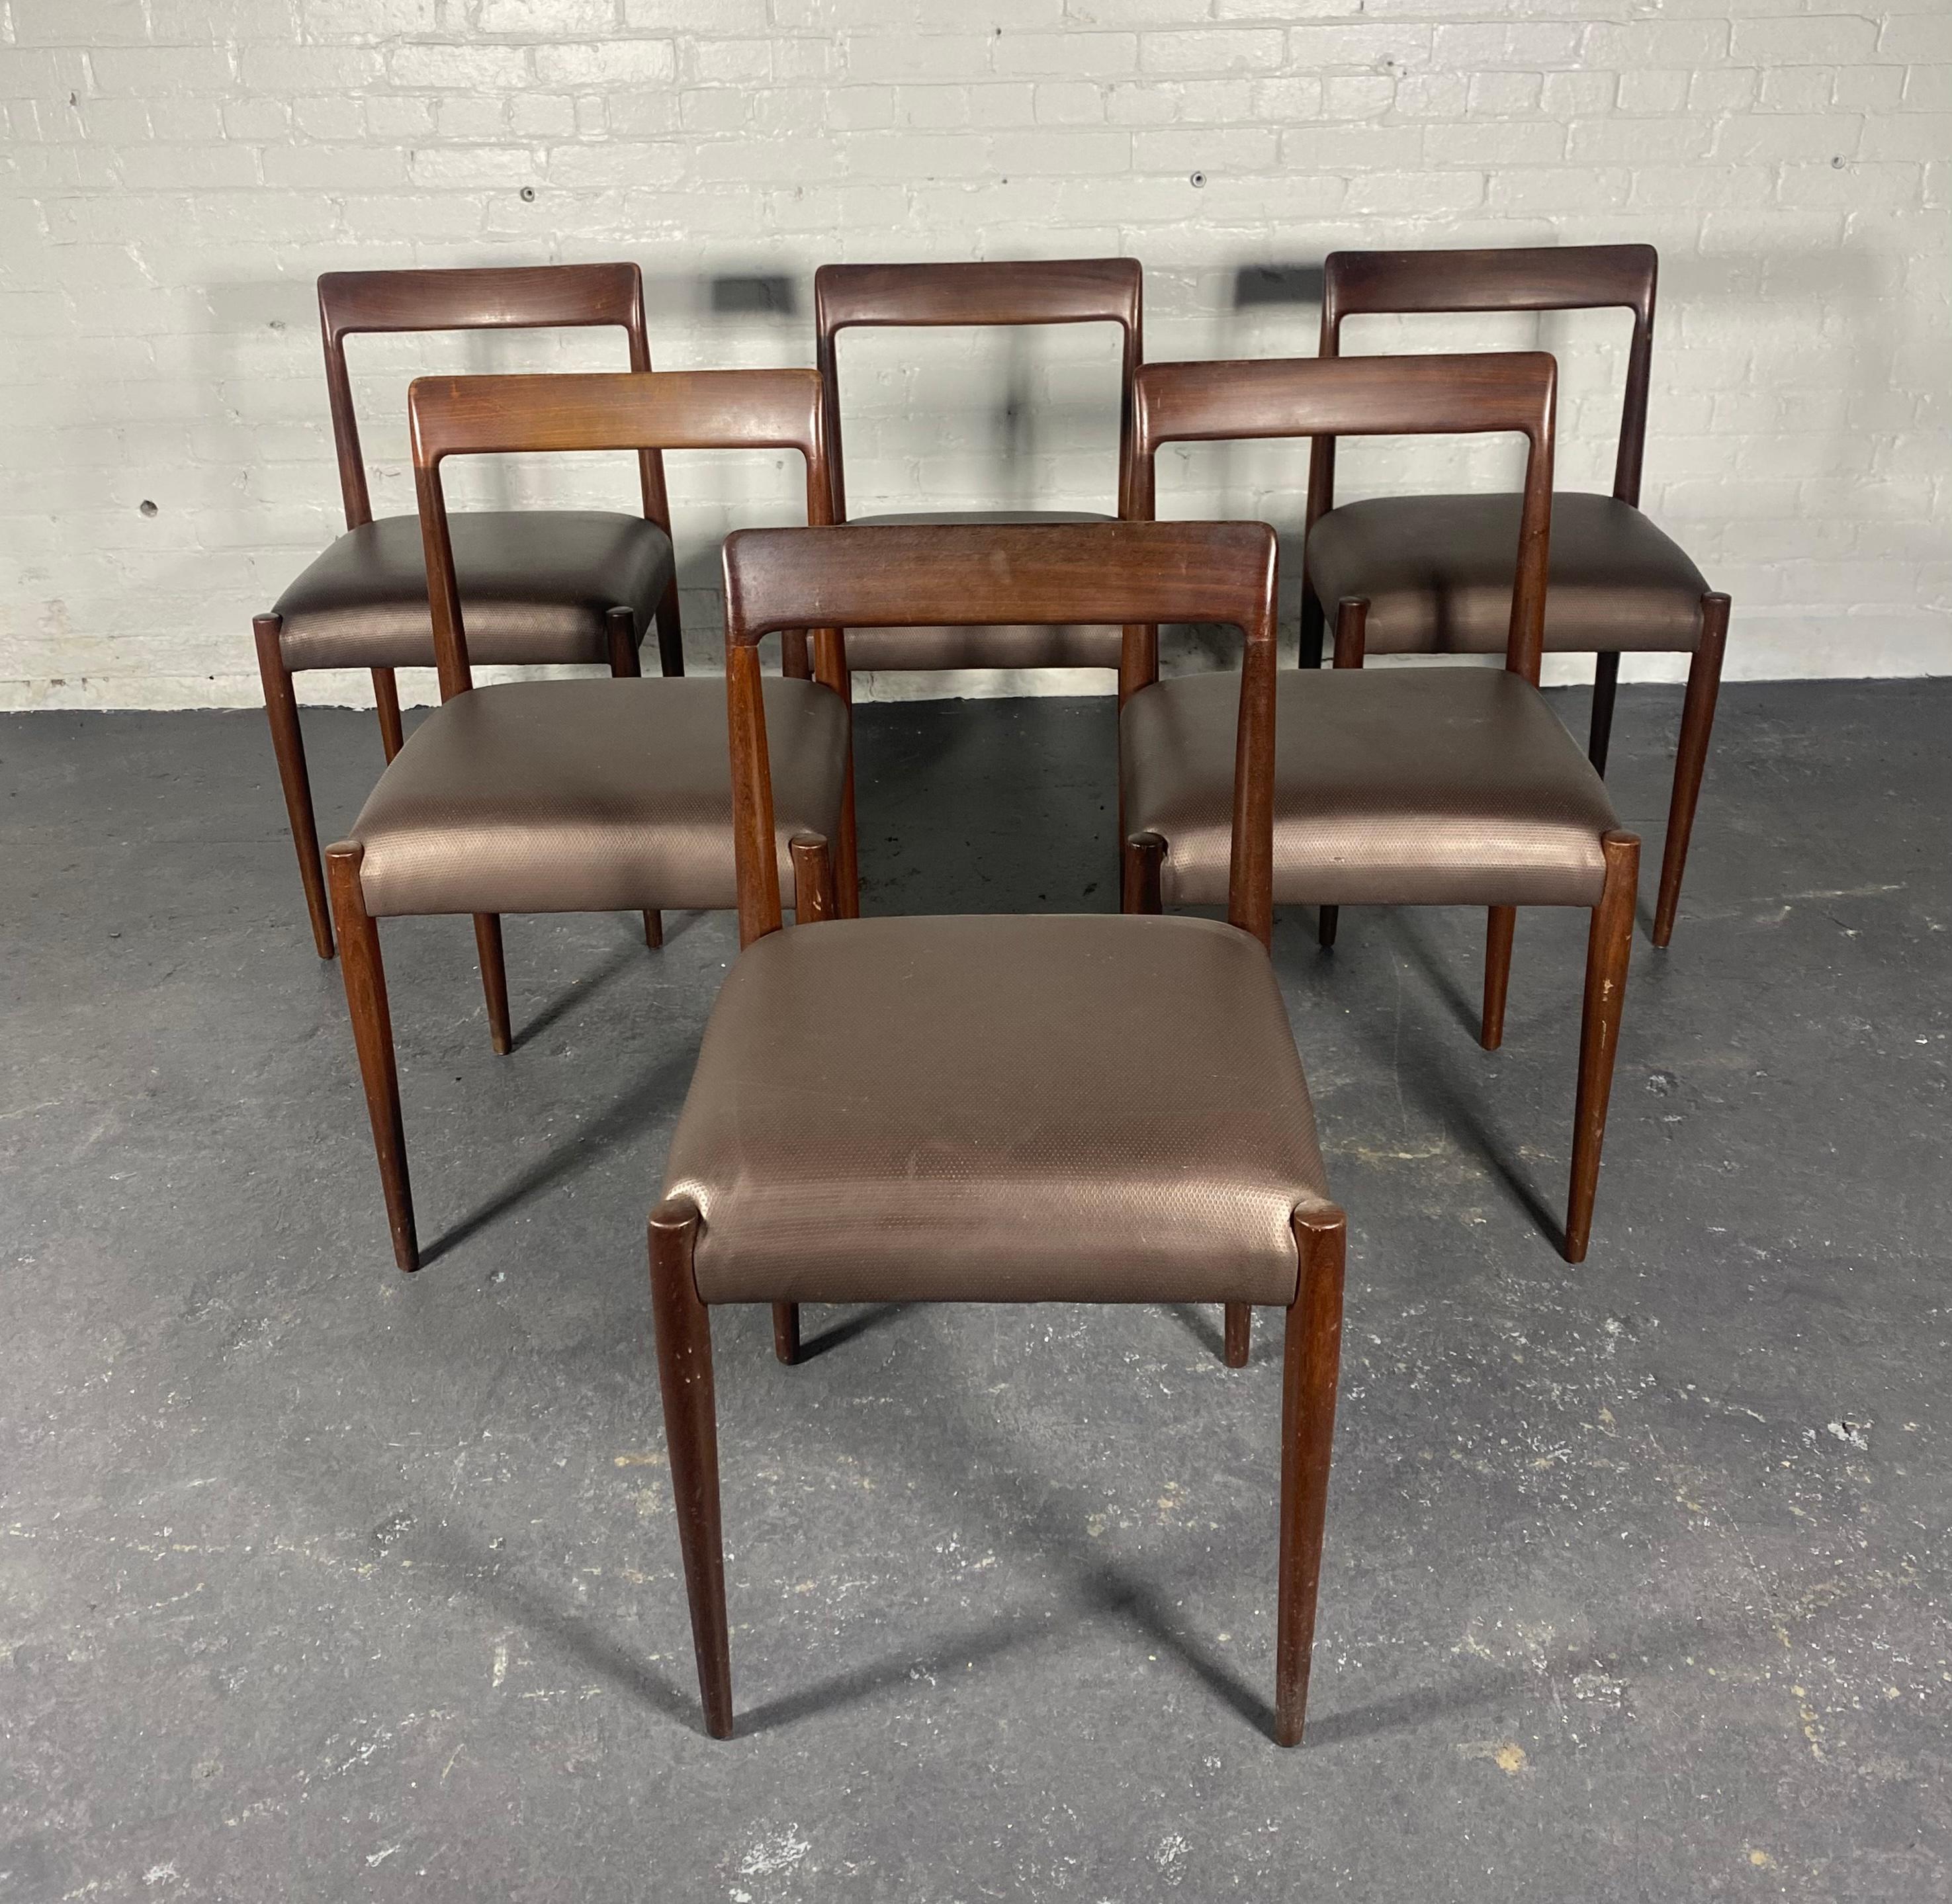 Classic Set 6 Scandinavian Rosewood Dining Chairs attributed to Soren Willadsem for Vejen,  Retain original finish, minor scuffs to wood,, structurally sound, tight sturdy joints.Seats were reupholstered at some point,, faux leather, Sleek simple